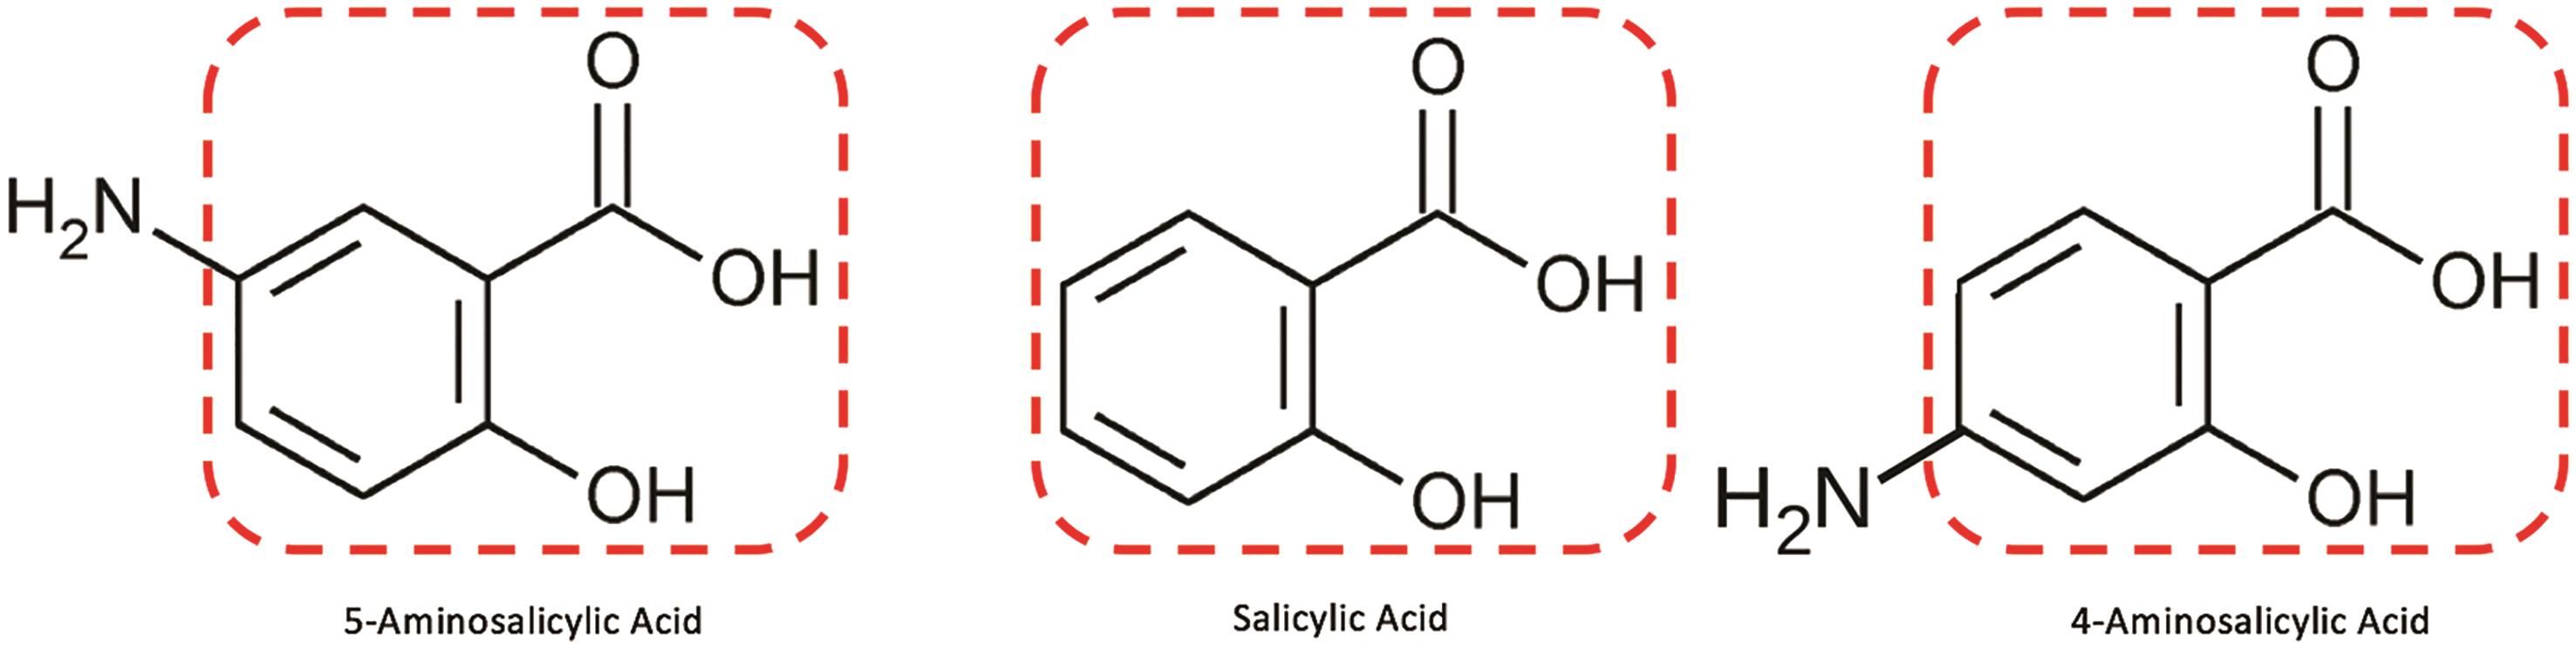 Comparison of functional groups of various salicylates implicated in methemoglobinemia.